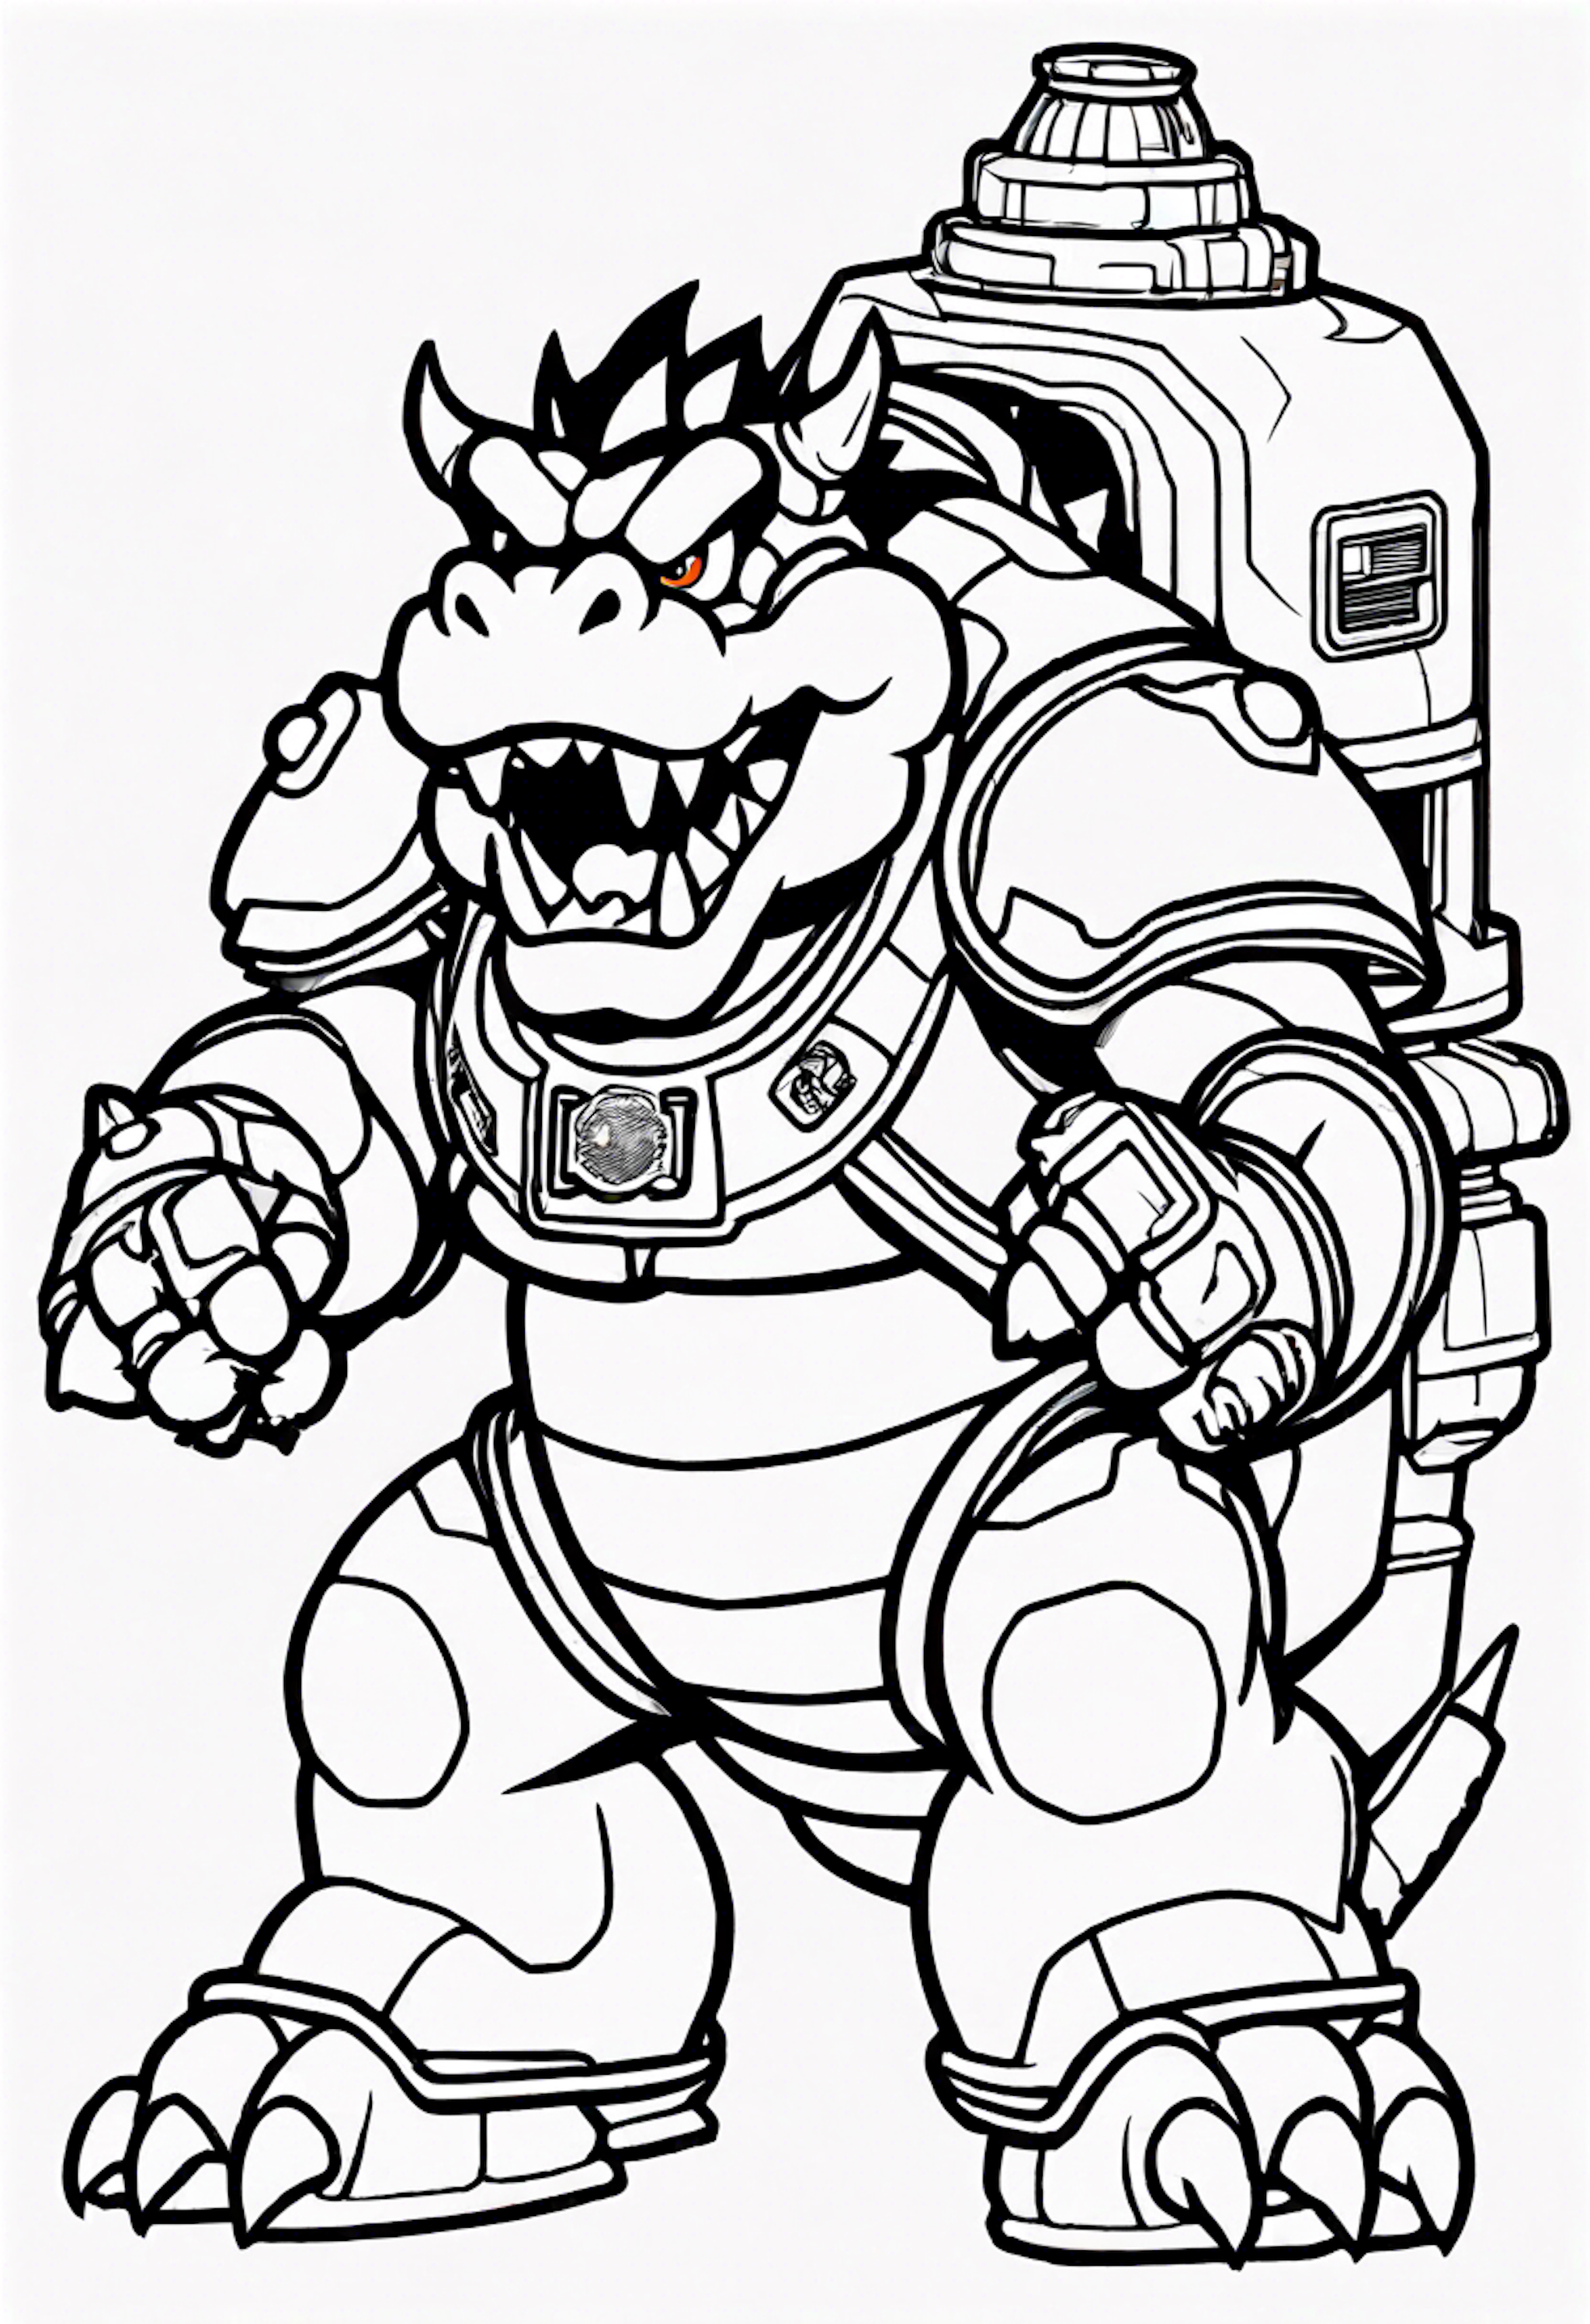 A coloring page for 19 Bowser coloring pages